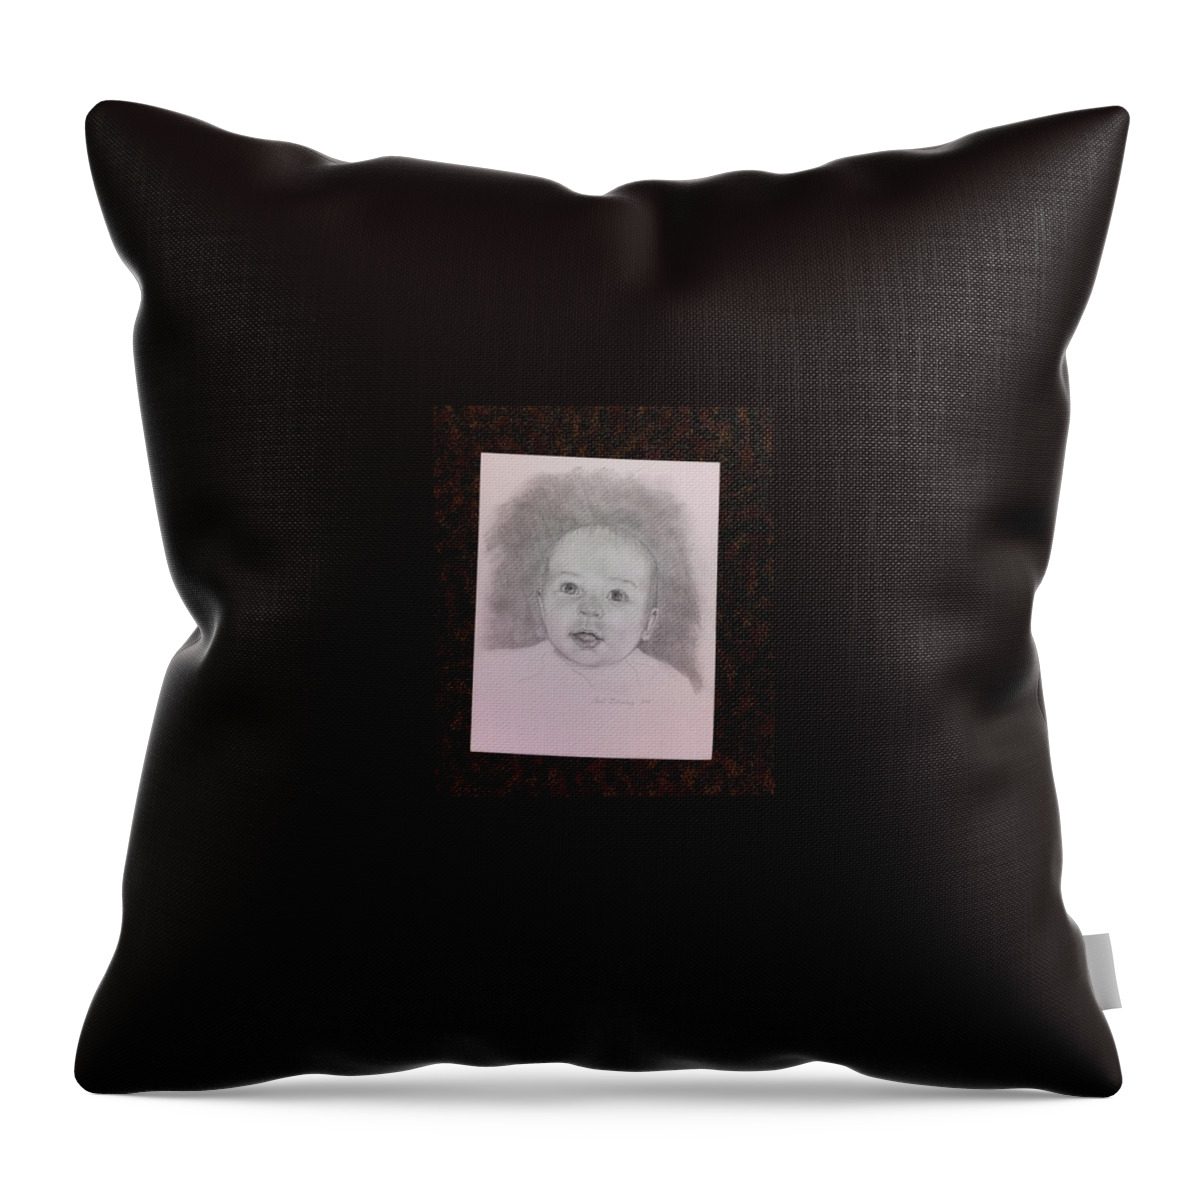  Throw Pillow featuring the painting Hudson by Carol Berning